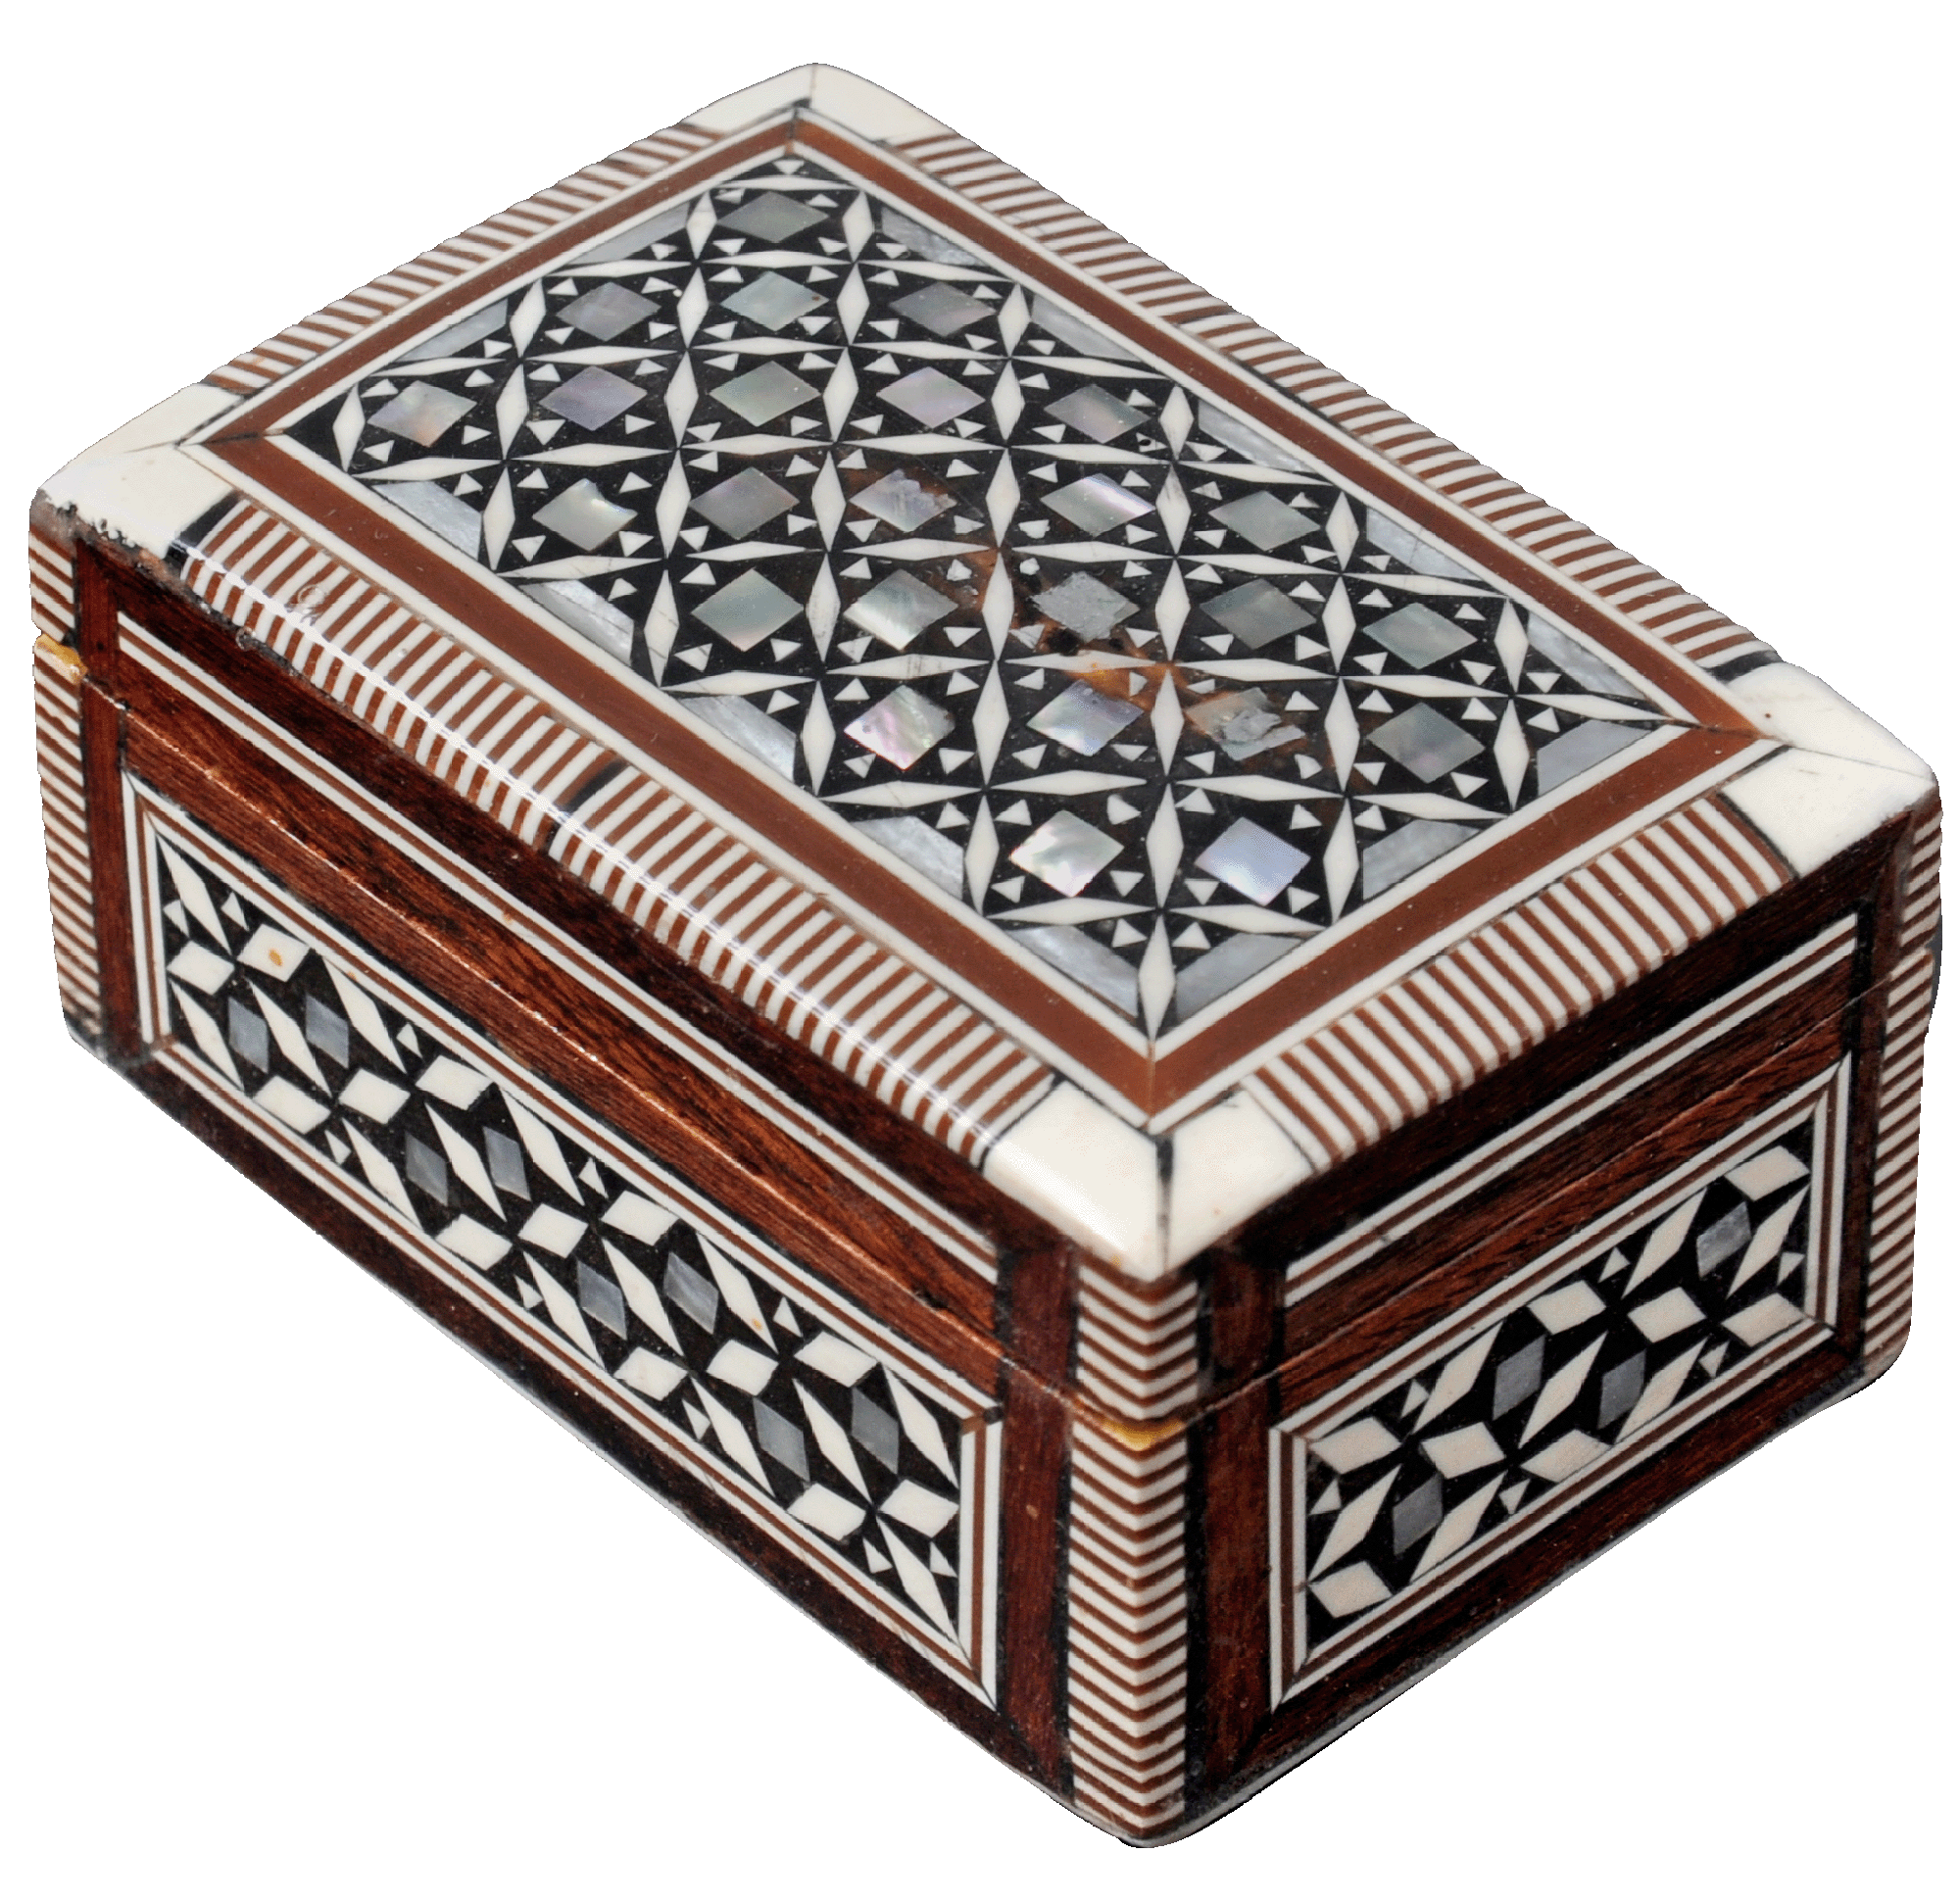 Egyptian Mosaic Jewelry Trinket Box Mother of Pearl BX2